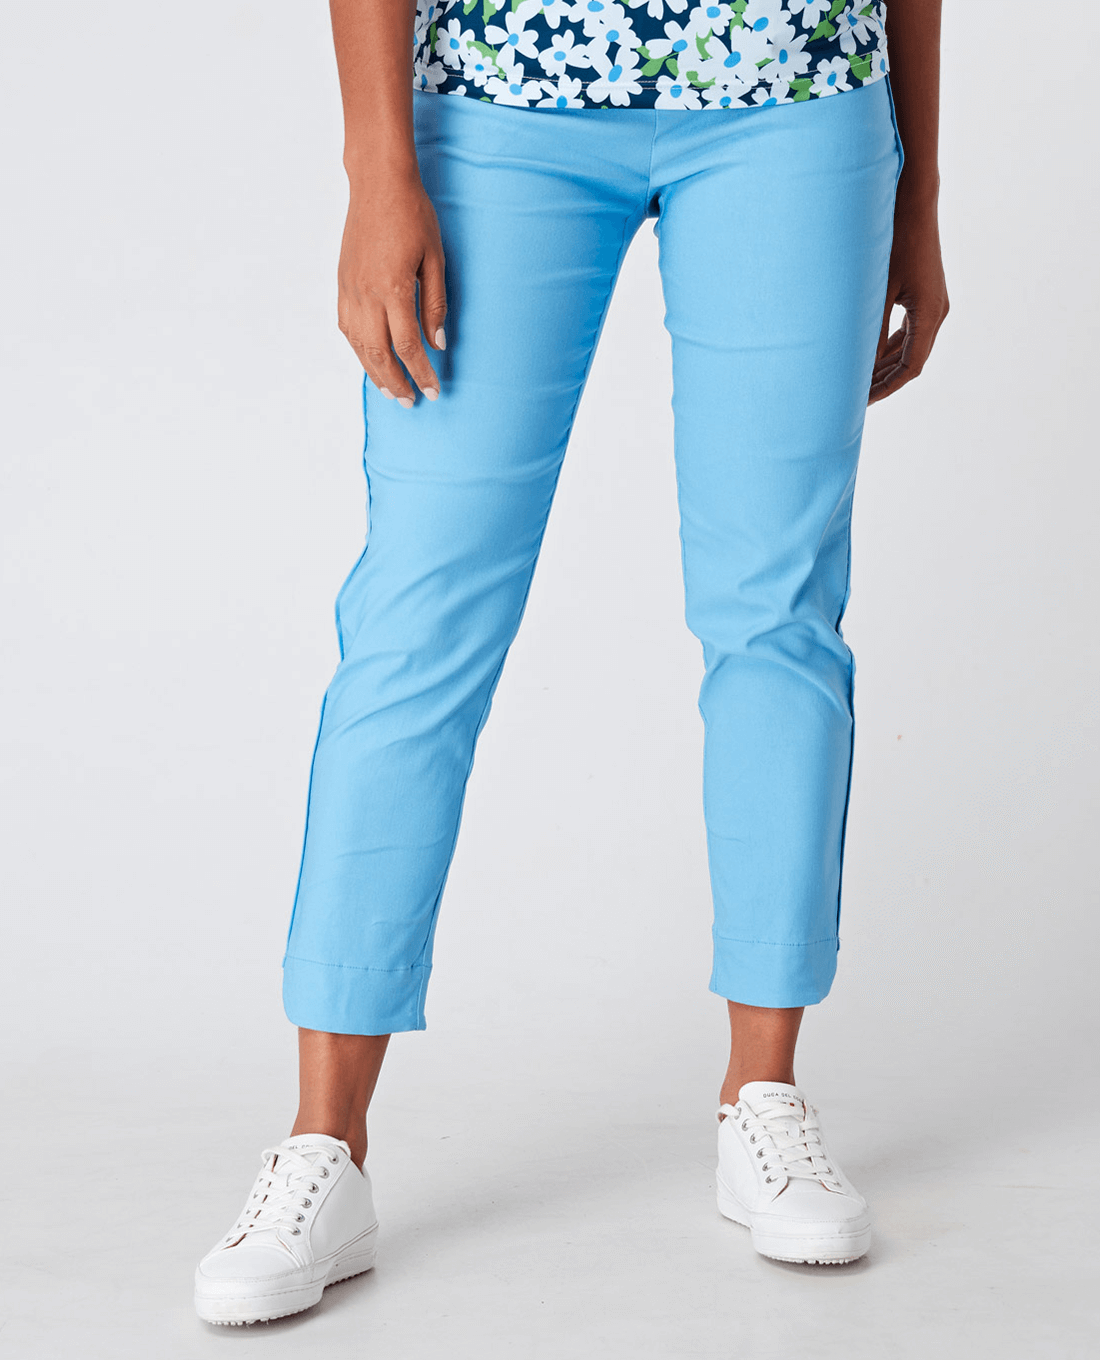 The Cropped Trouser Edit - Perfect for summer golf 💫 - Love Golf